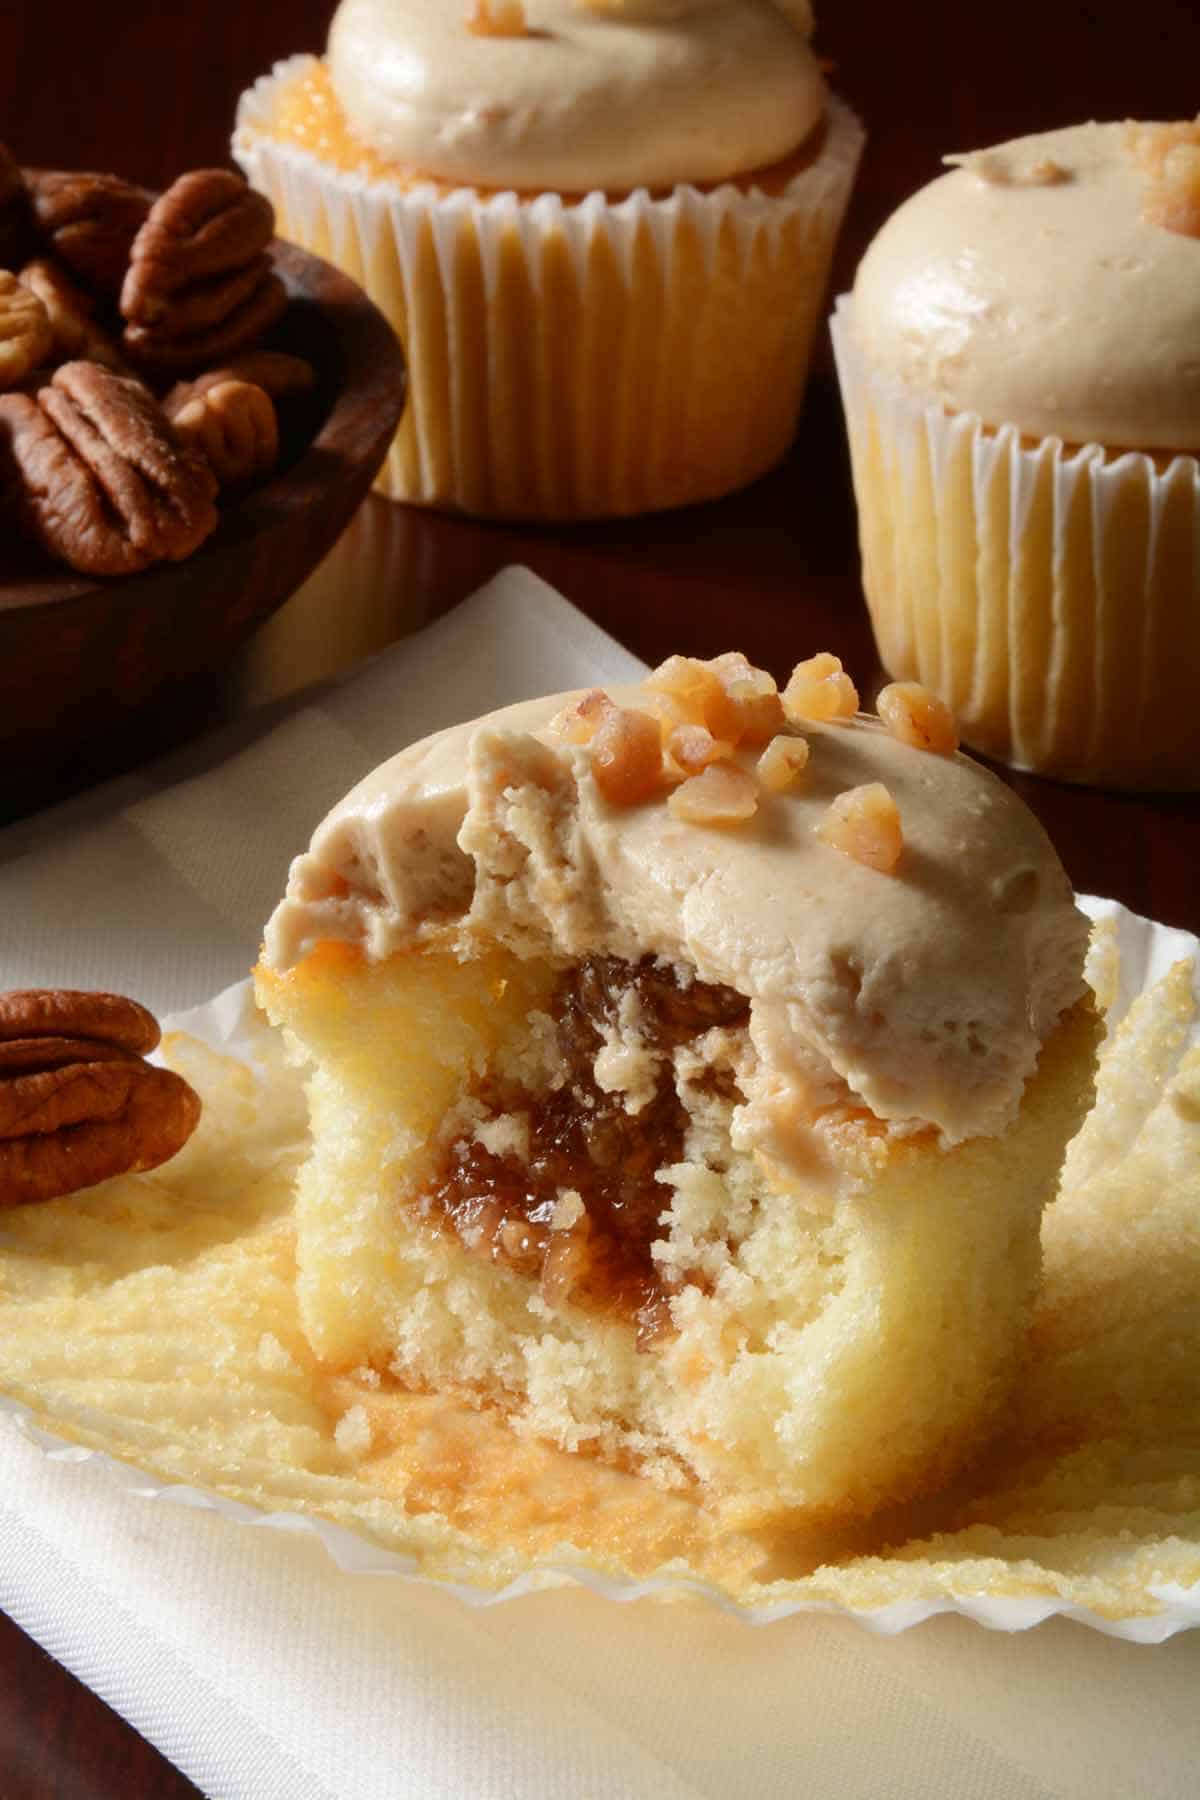 Lemon cupcake with cookie butter center and caramel frosting.